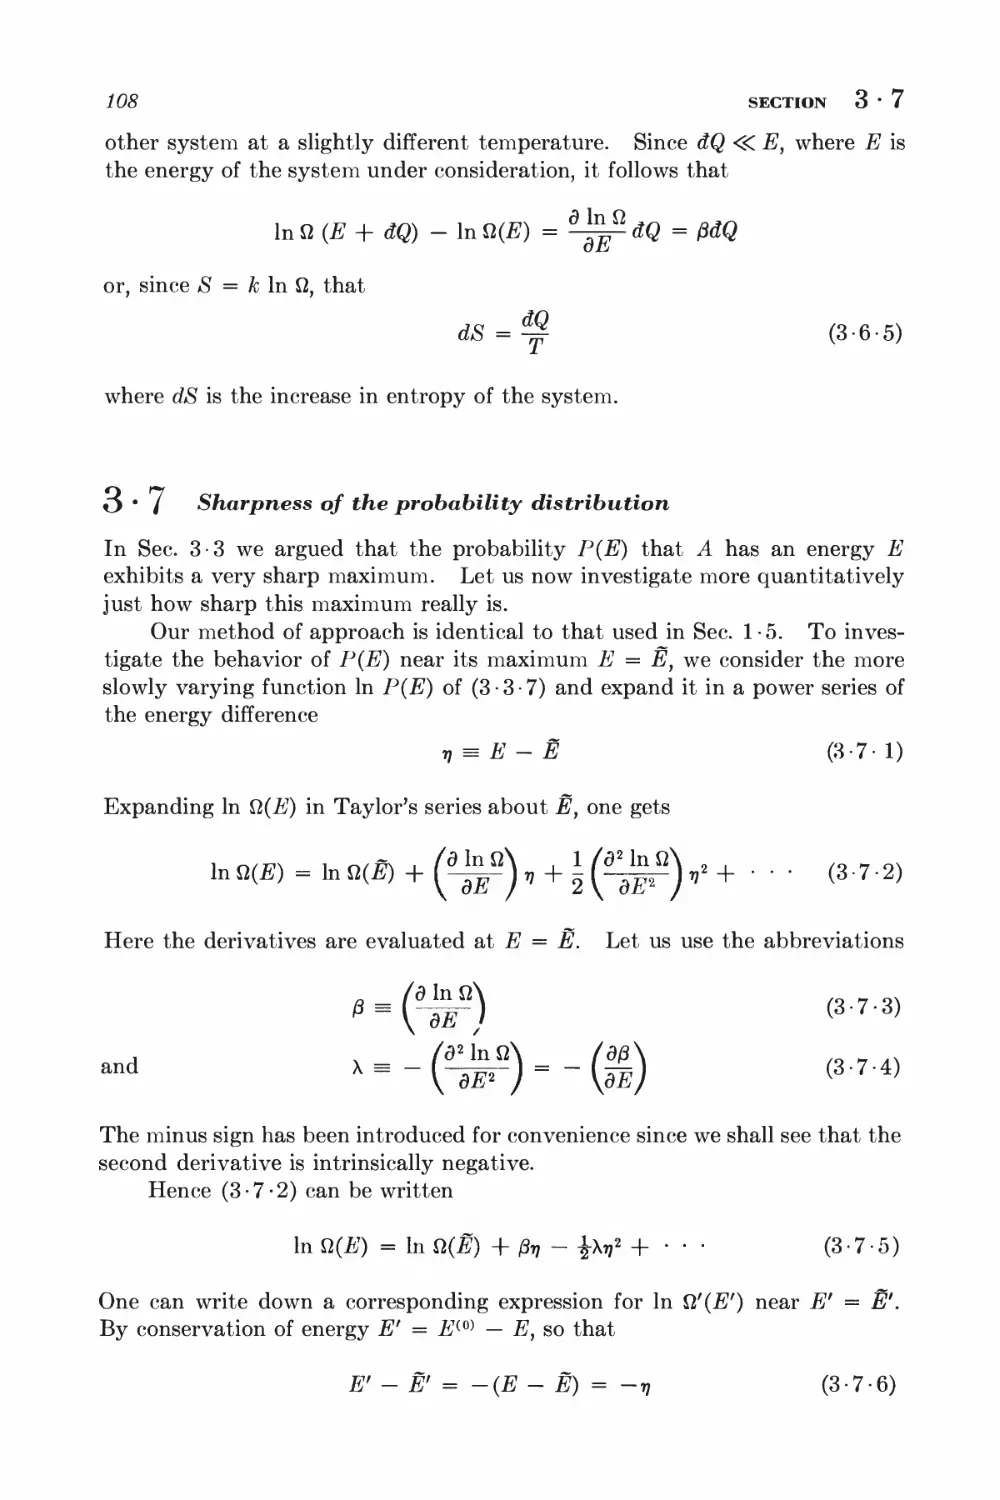 3.7 Sharpness of the probability distribution